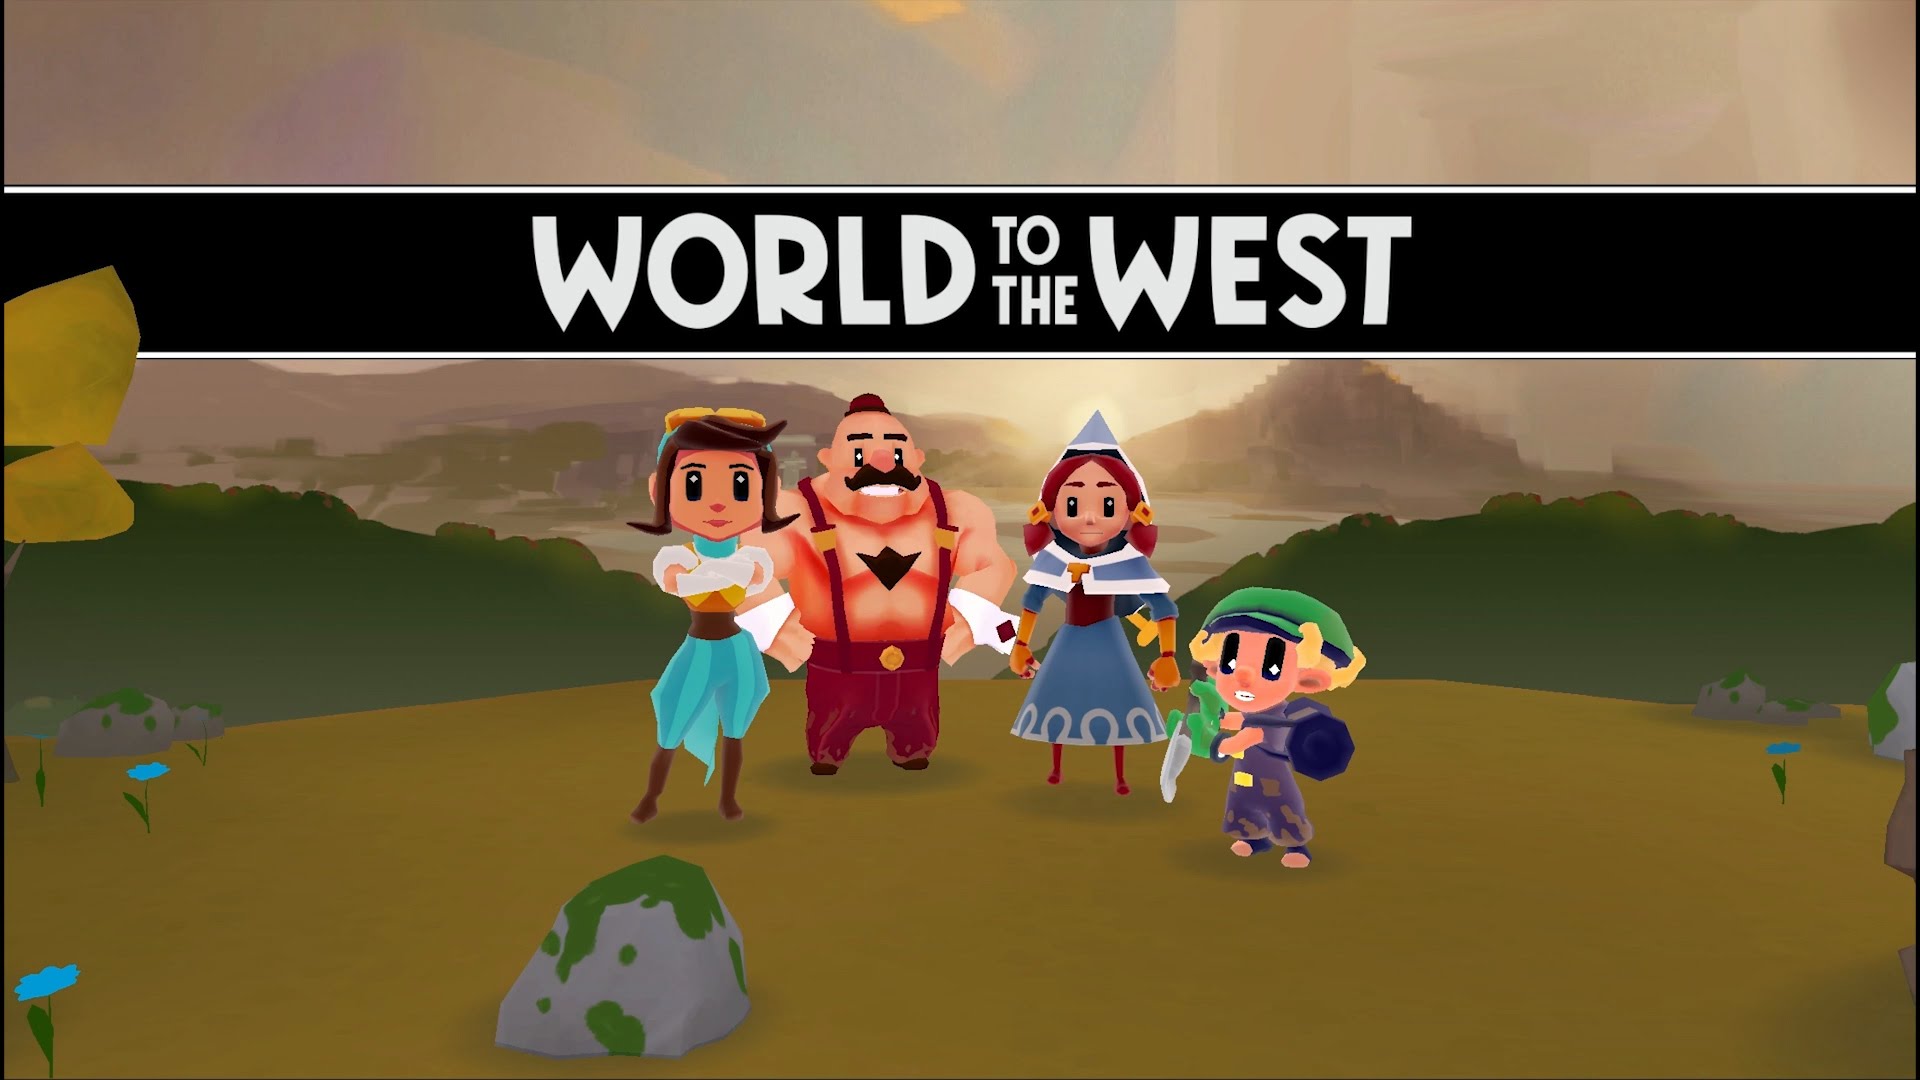 World_to_the_west_3